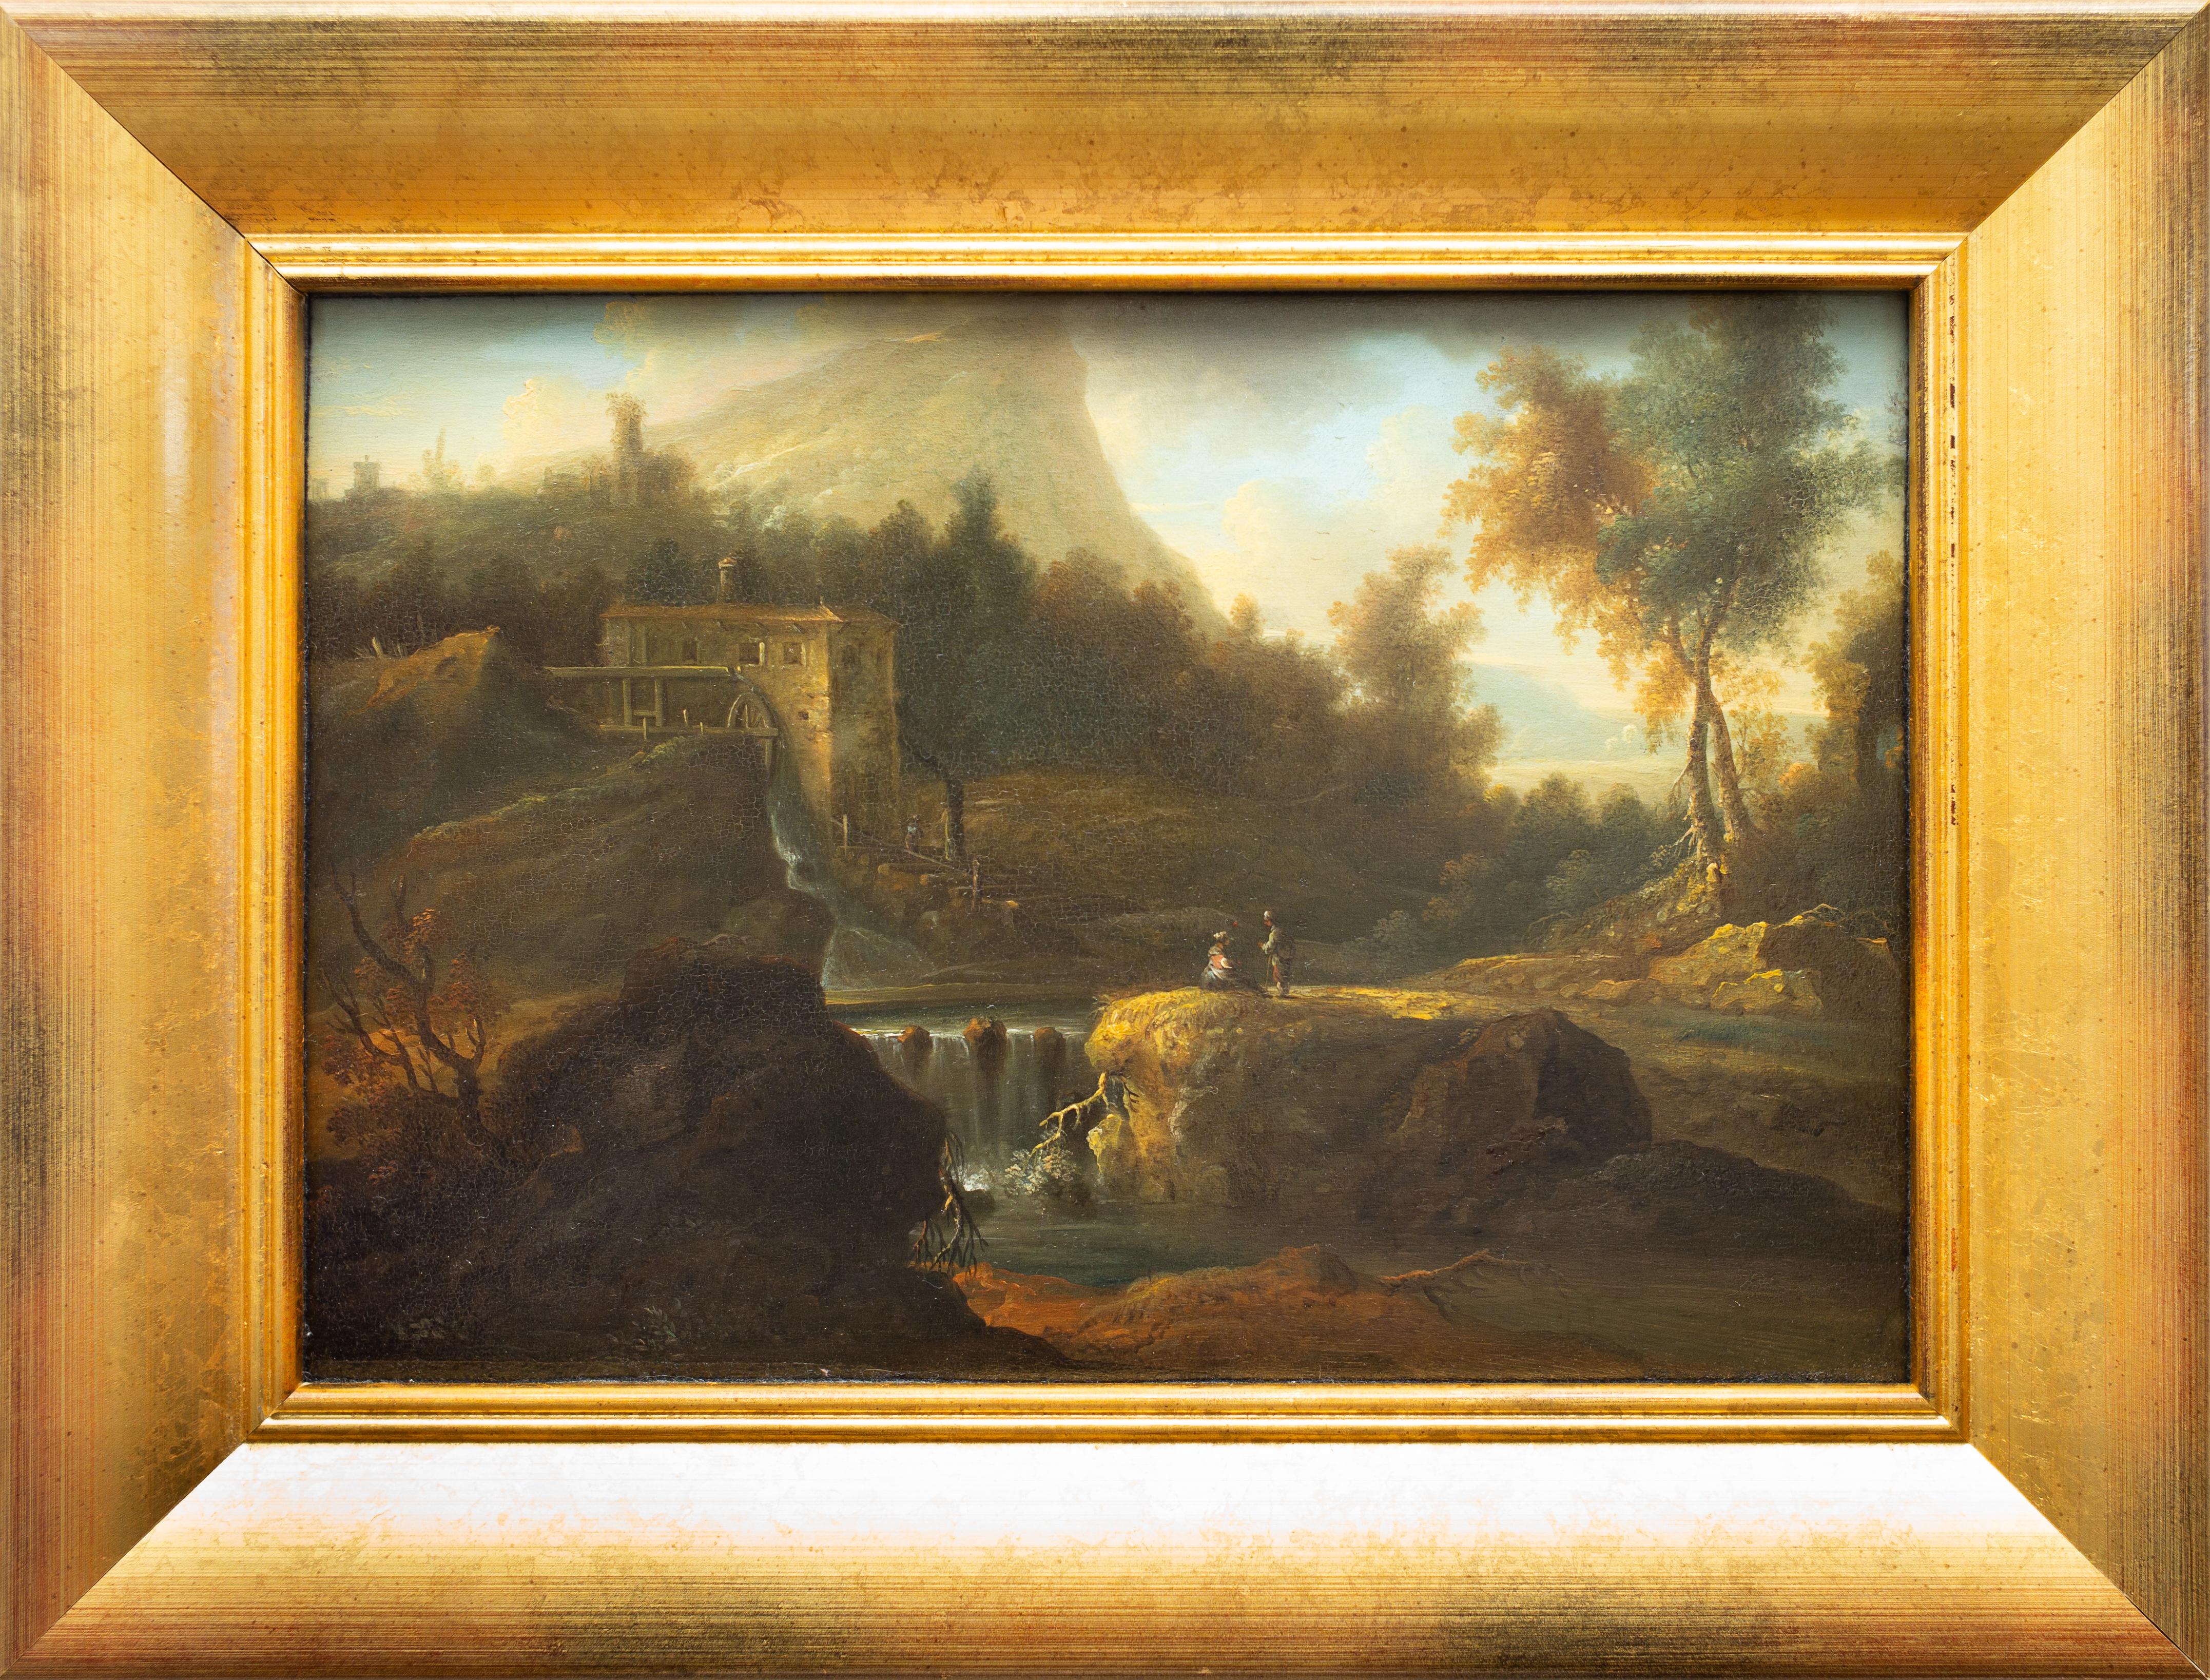 Italian Landscape With Figures at a Waterfall by a Follower of Jan van Huysum - Painting by Jan Van Huysum